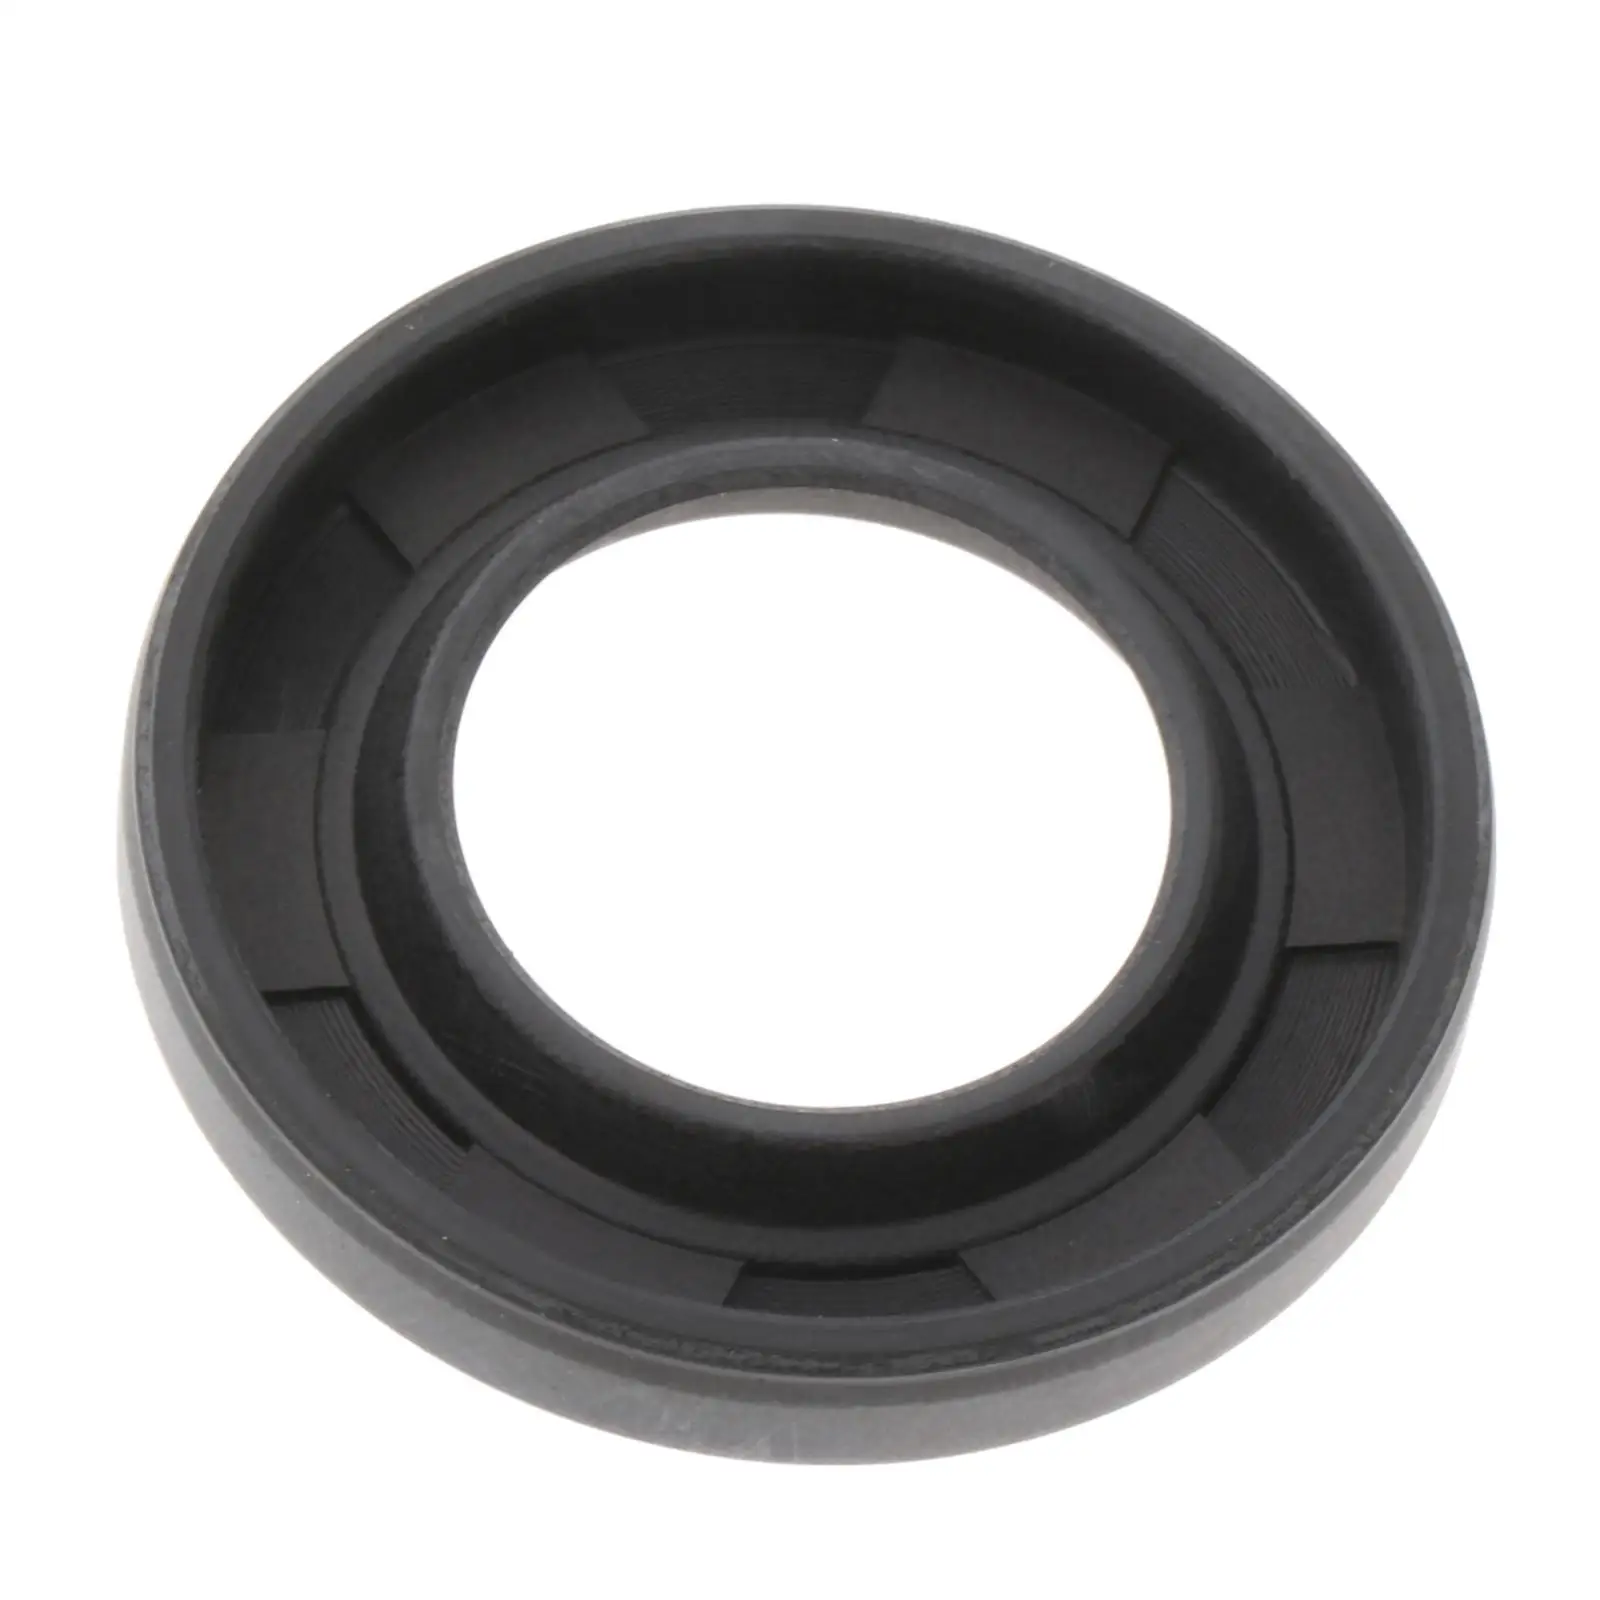 Boat Motor Oil Seal Direct Replaces 93106-18M01 Fit for Yamaha Outboard Motor 60HP 70HP 2T 3cyl Outboard Engine